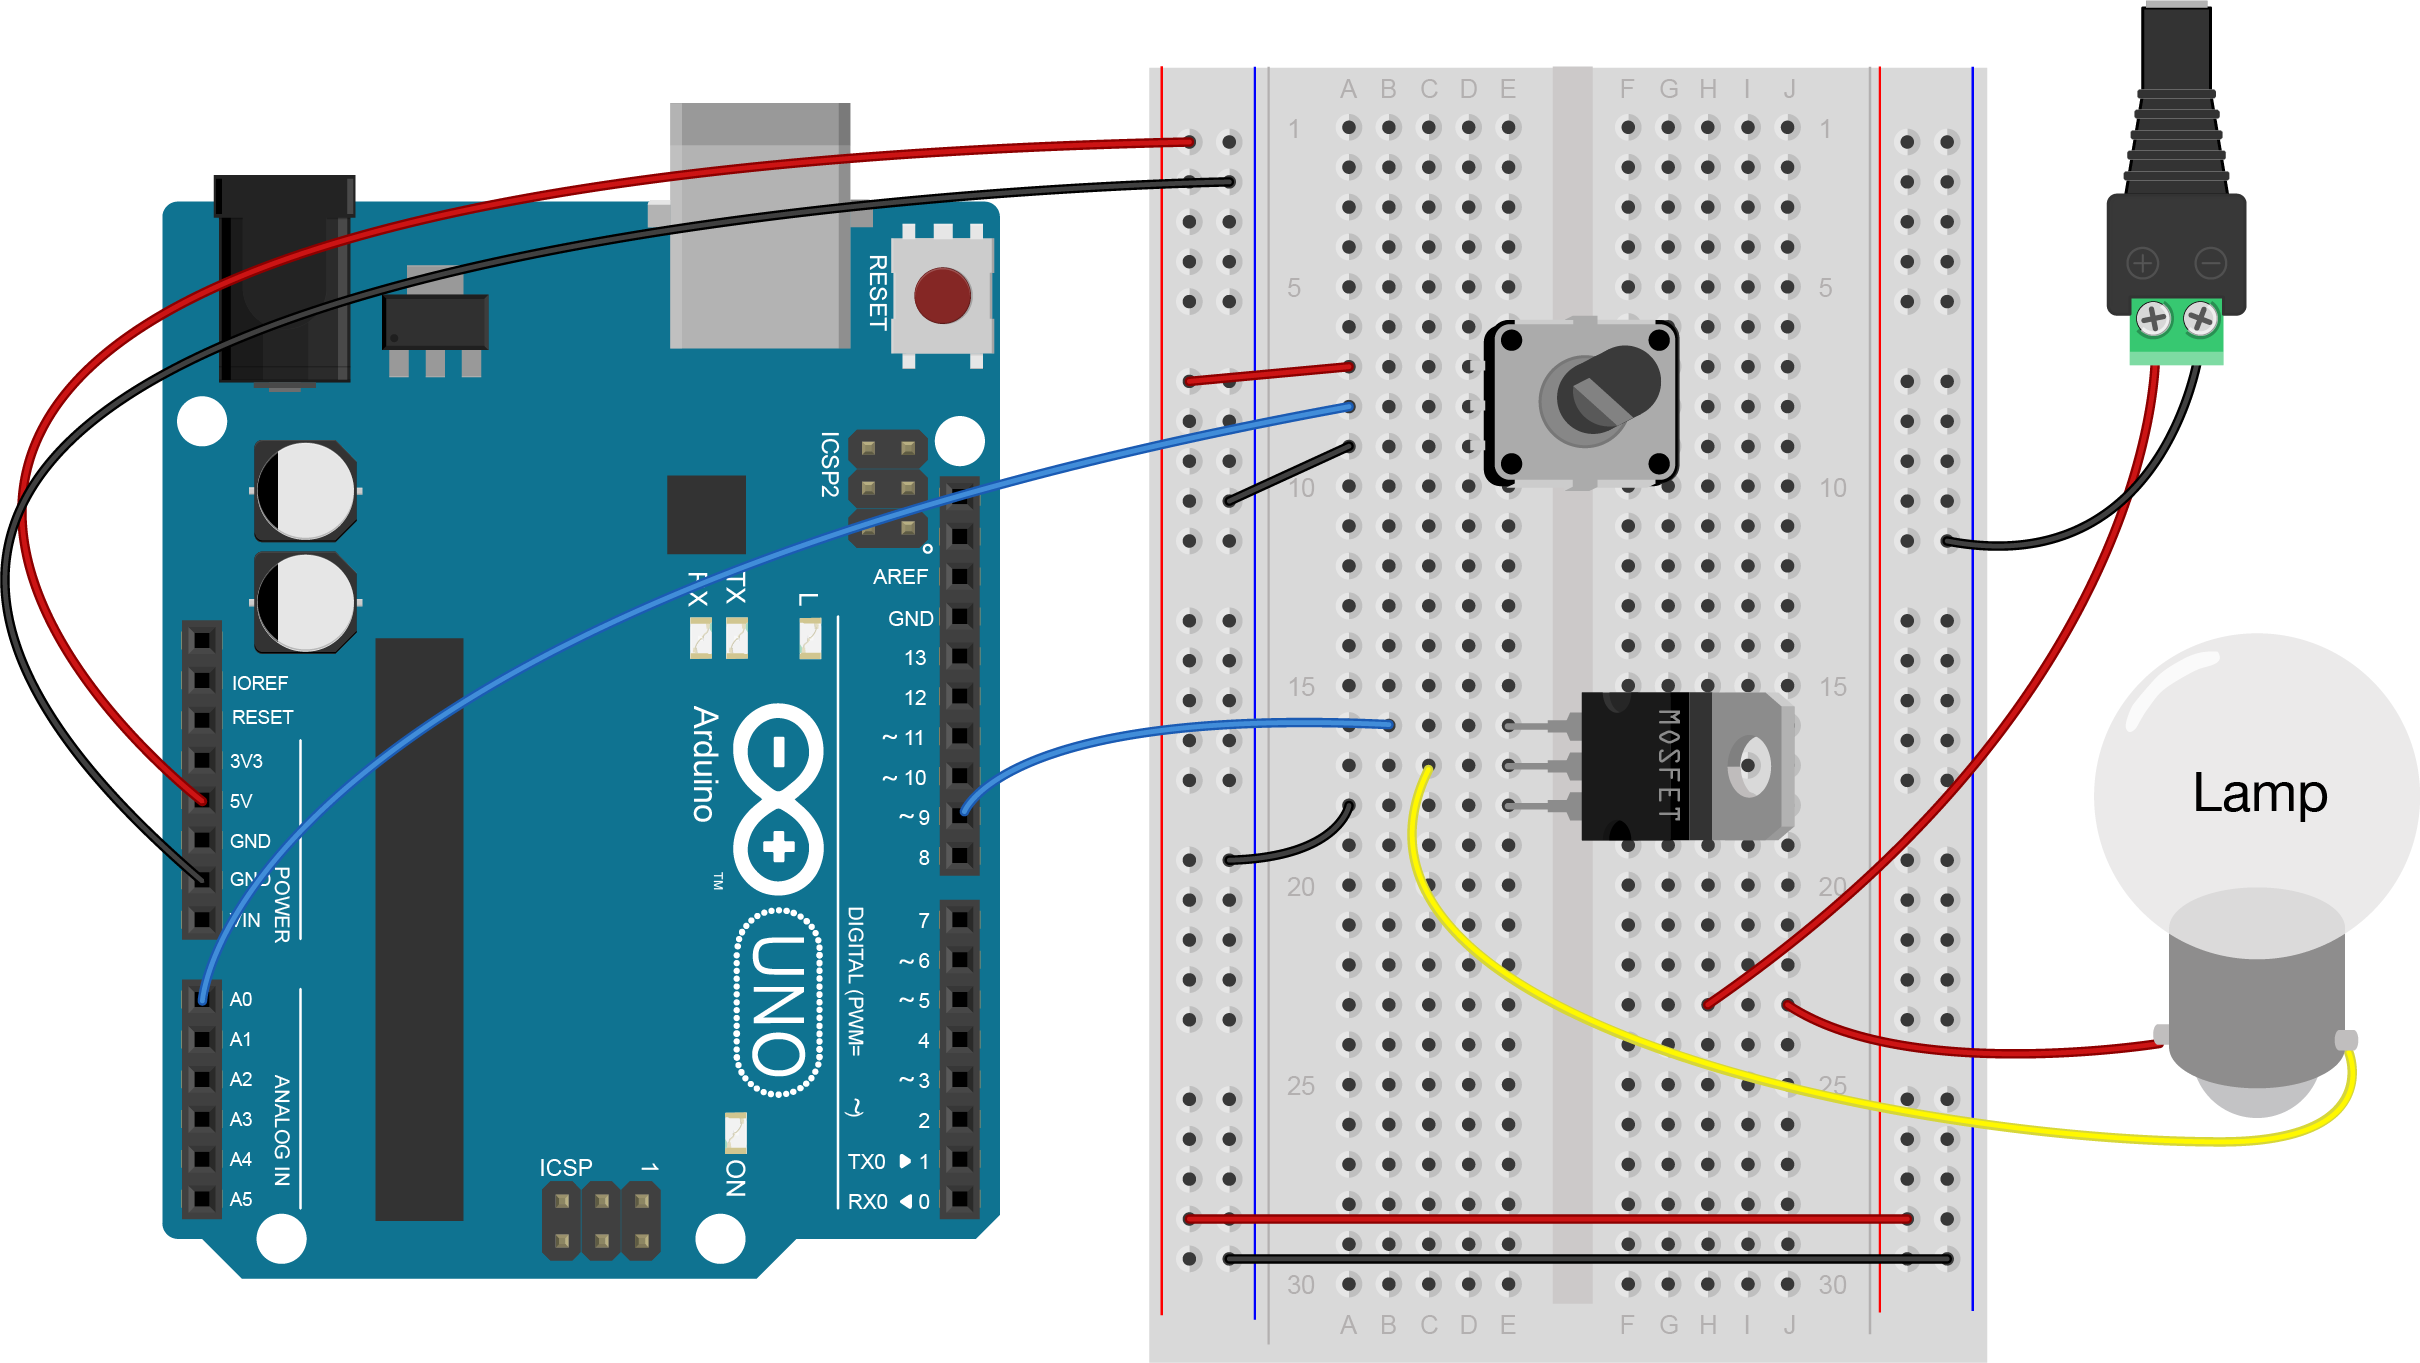 Breadboard view of a potentiometer, MOSFET, and lamp connected to an Arduino. 